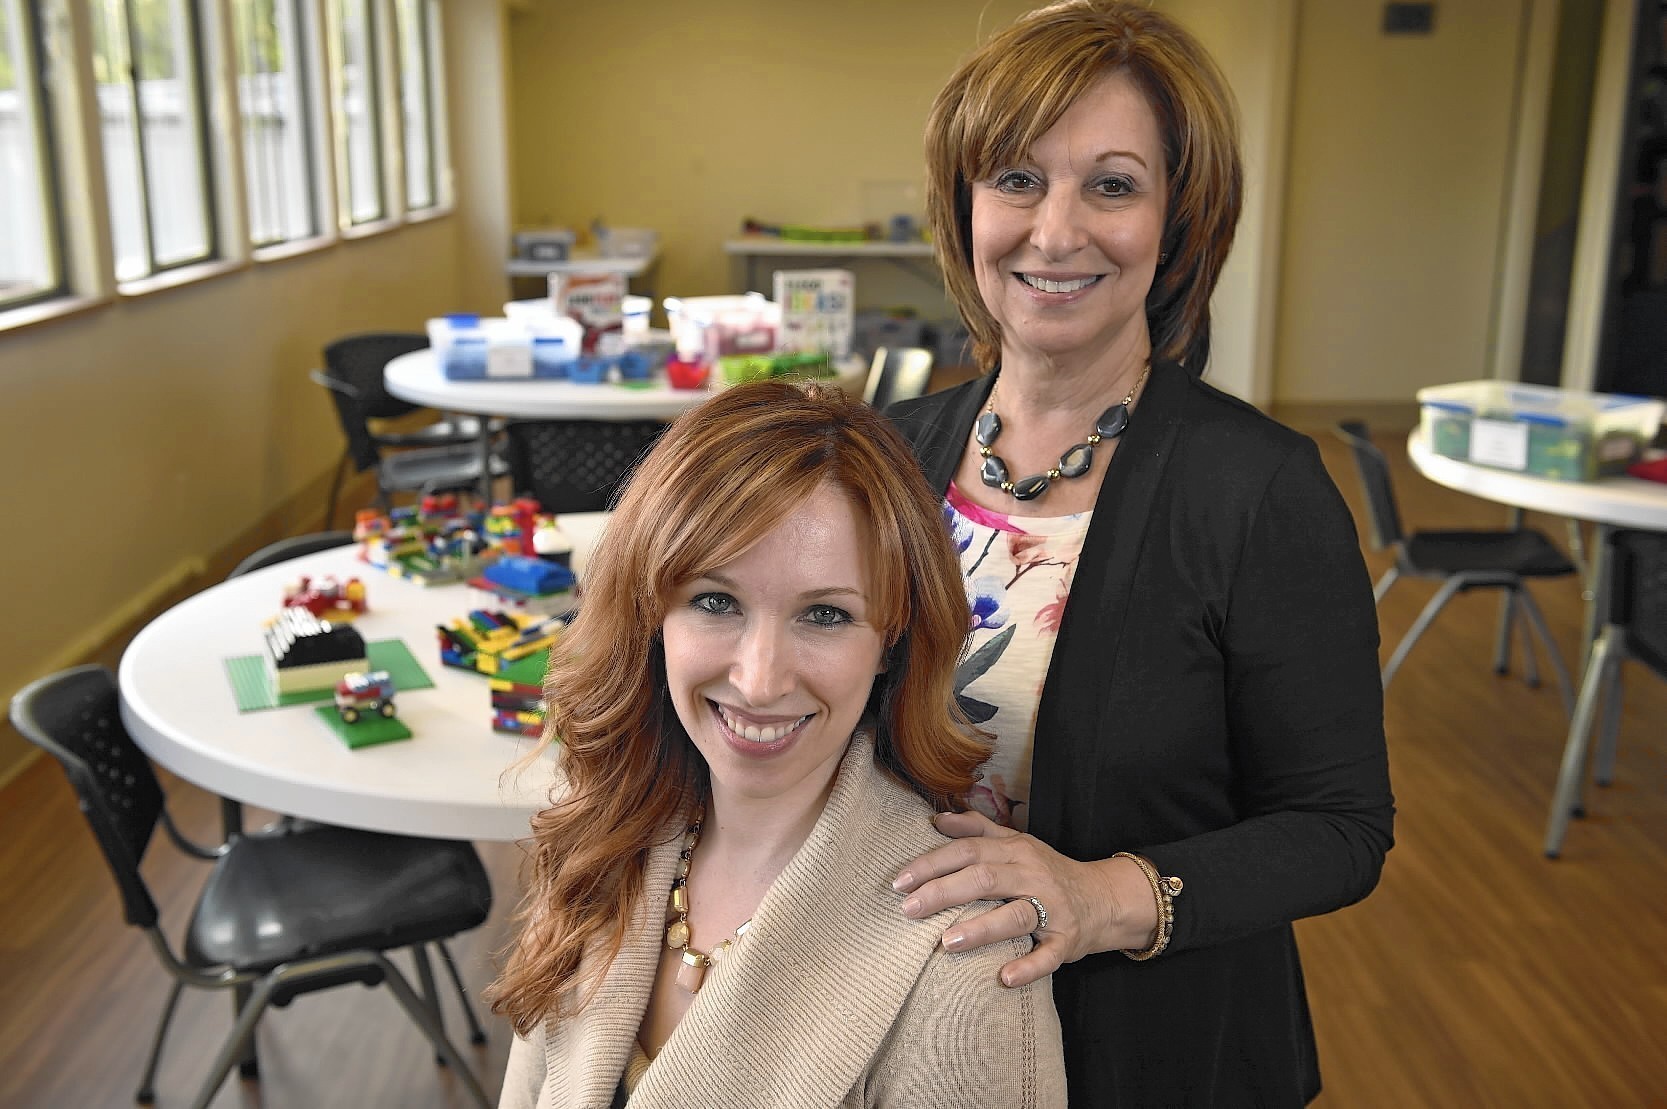 Mother Daughter Team Founded Center That Became A Community Courant